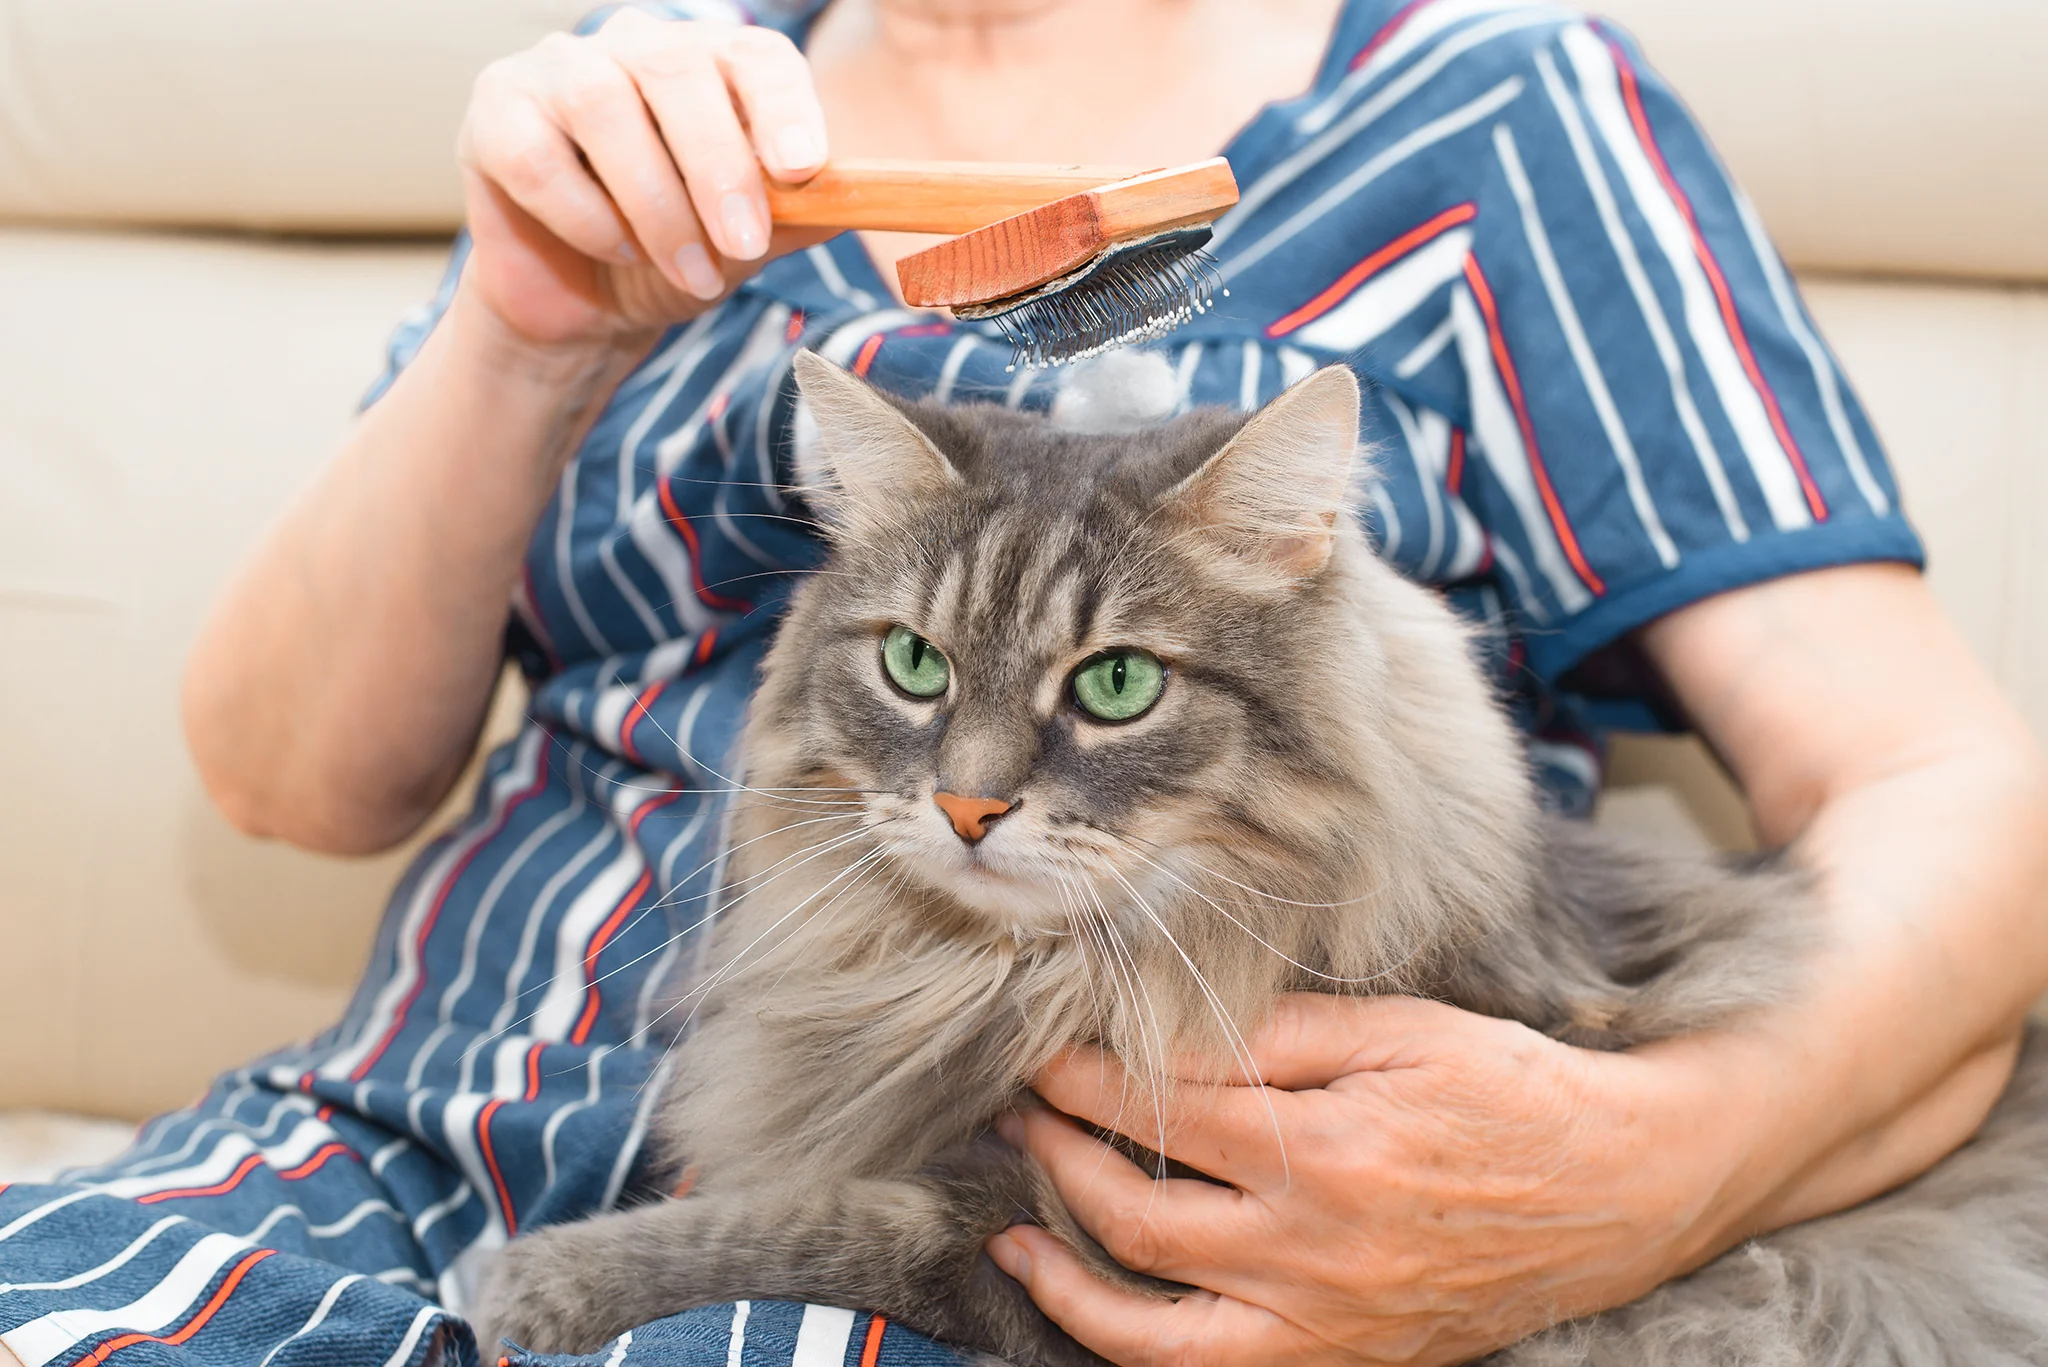 Senior woman combing her long-haired cat